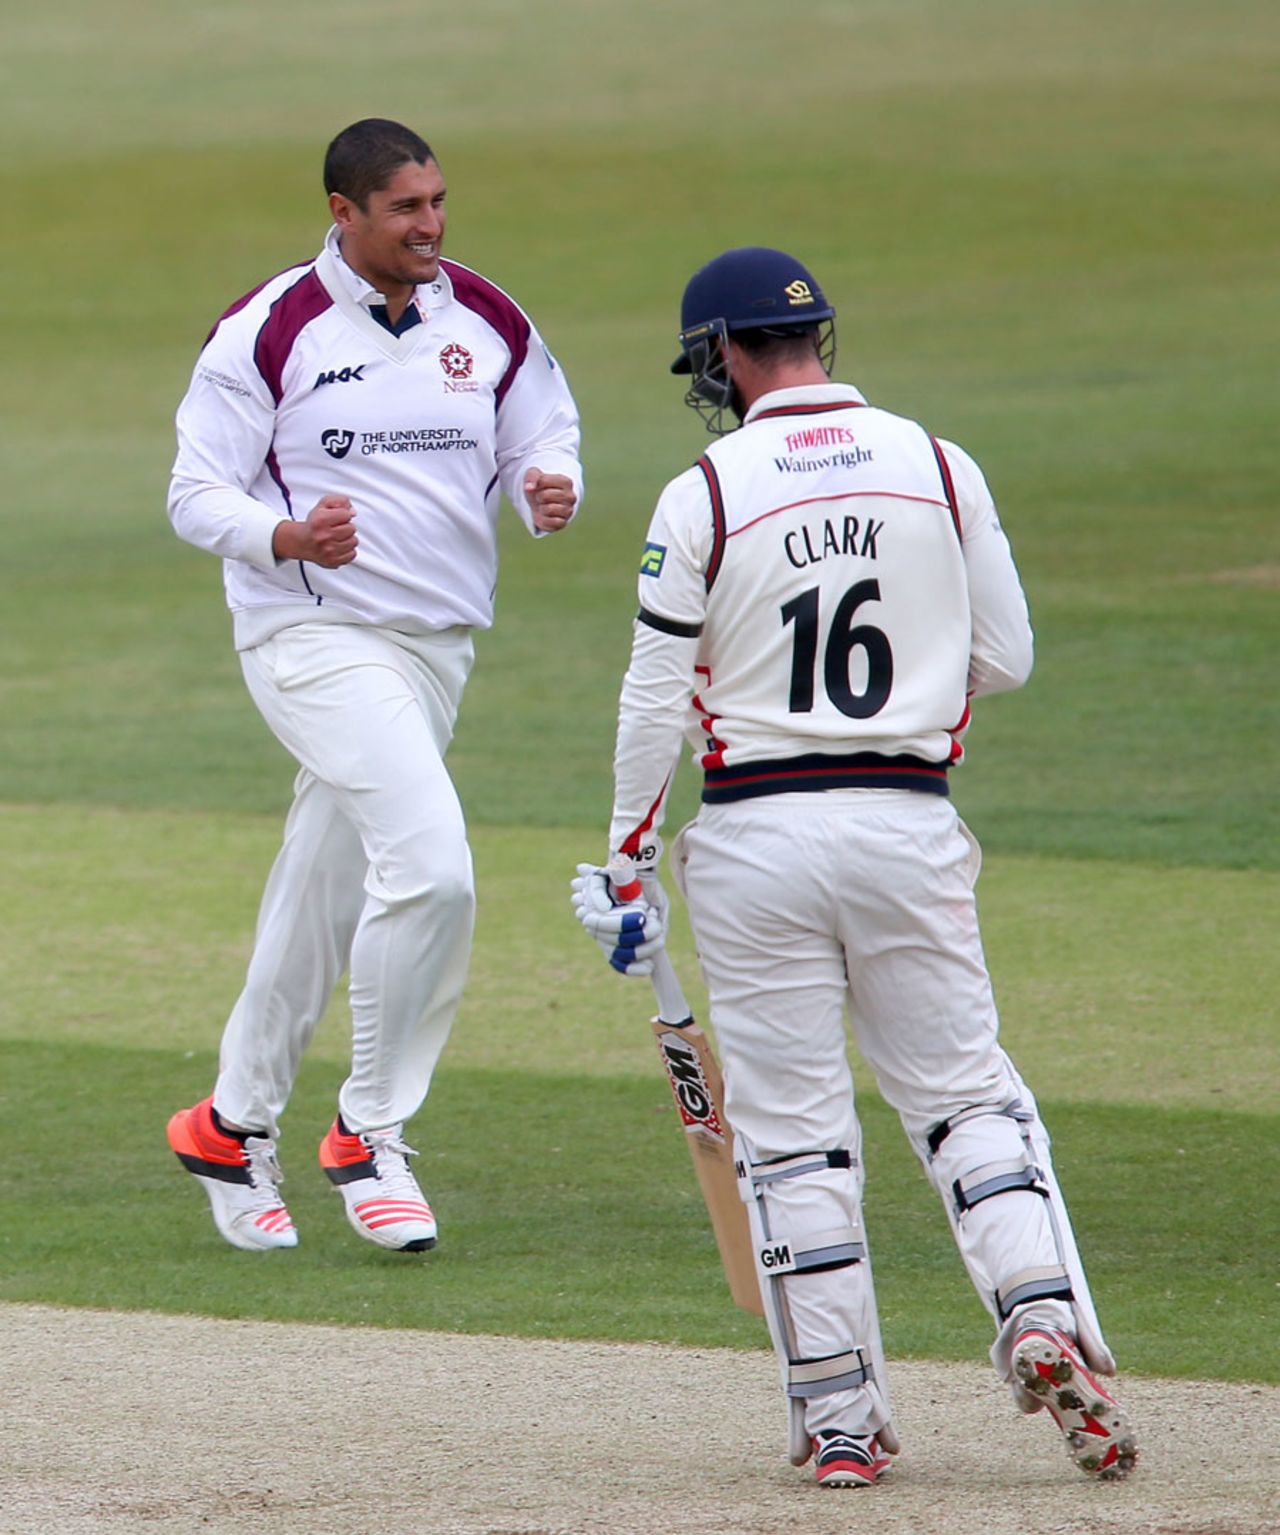 Rory Kleinveldt picked up Jordan Clark for a duck, Northamptonshire v Lancashire, County Championship, Division Two, Wantage Road, 3rd day, May 5, 2015